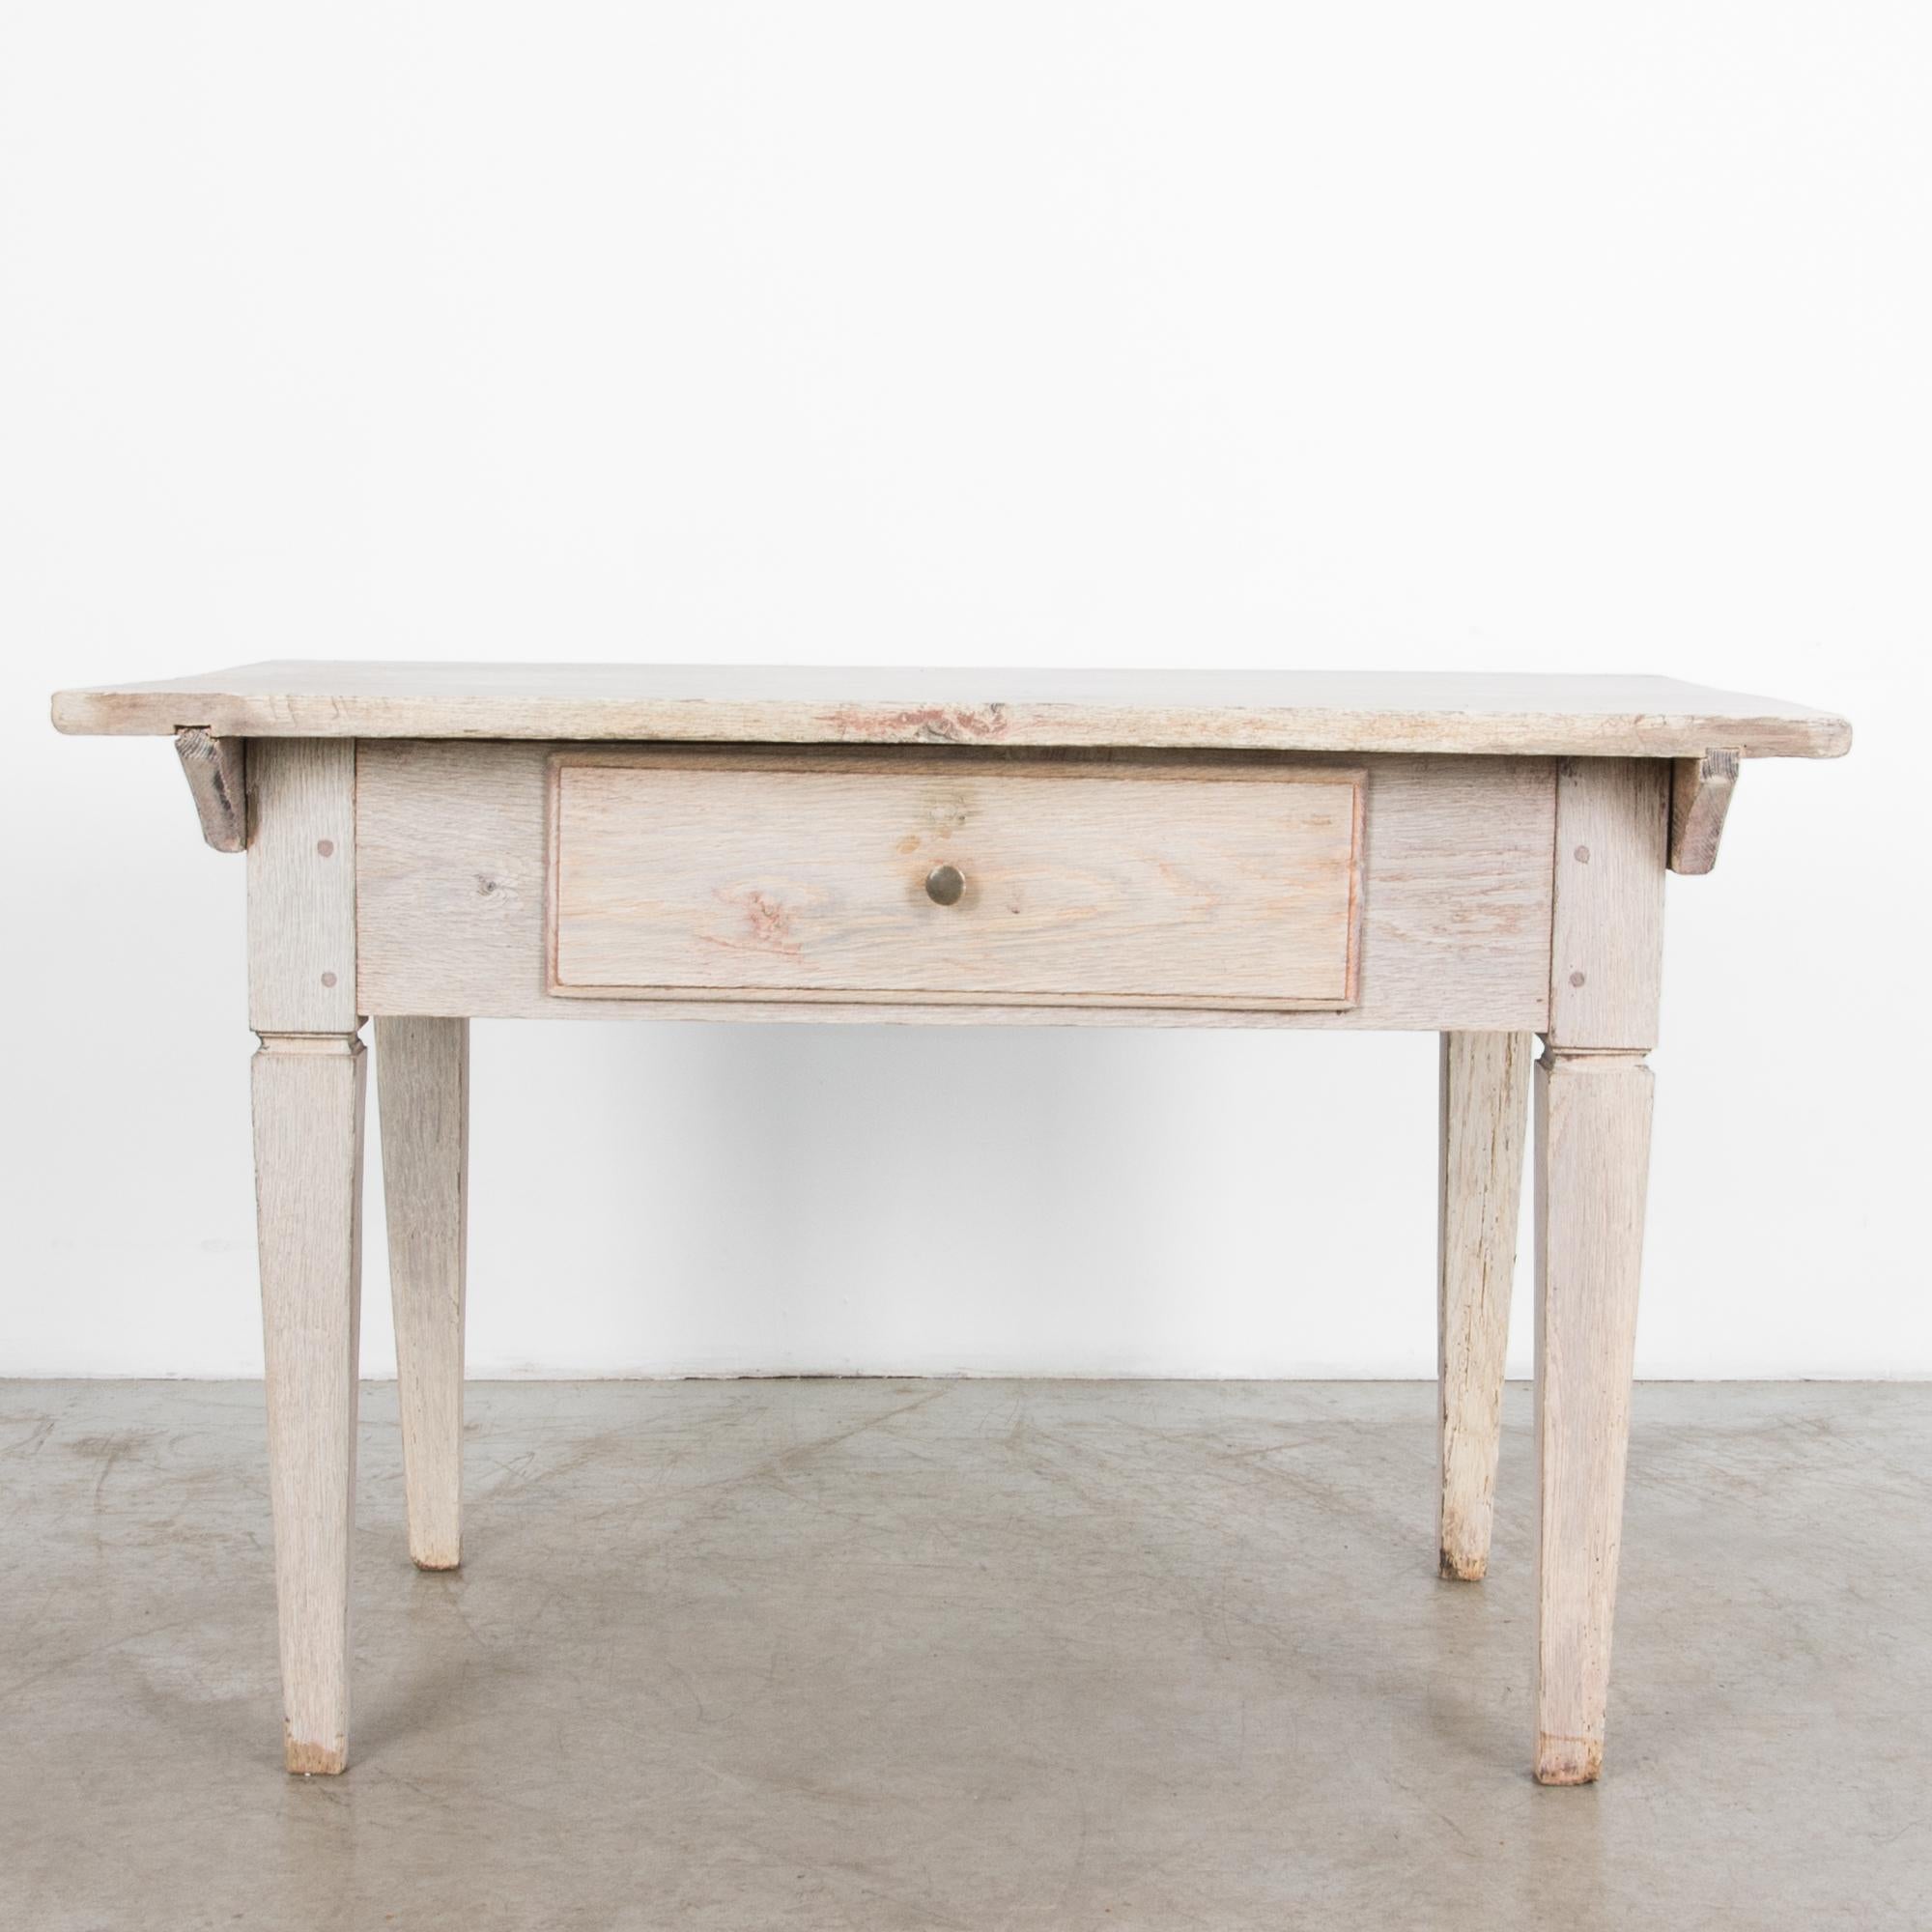 An oak side table with drawer from Sweden, circa 1880. In Gustavian fashion
this piece features the crisp lines and simple forms famous in Scandinavian furniture, with a subtle elegance, a nuanced sense of balance and style in a simple and